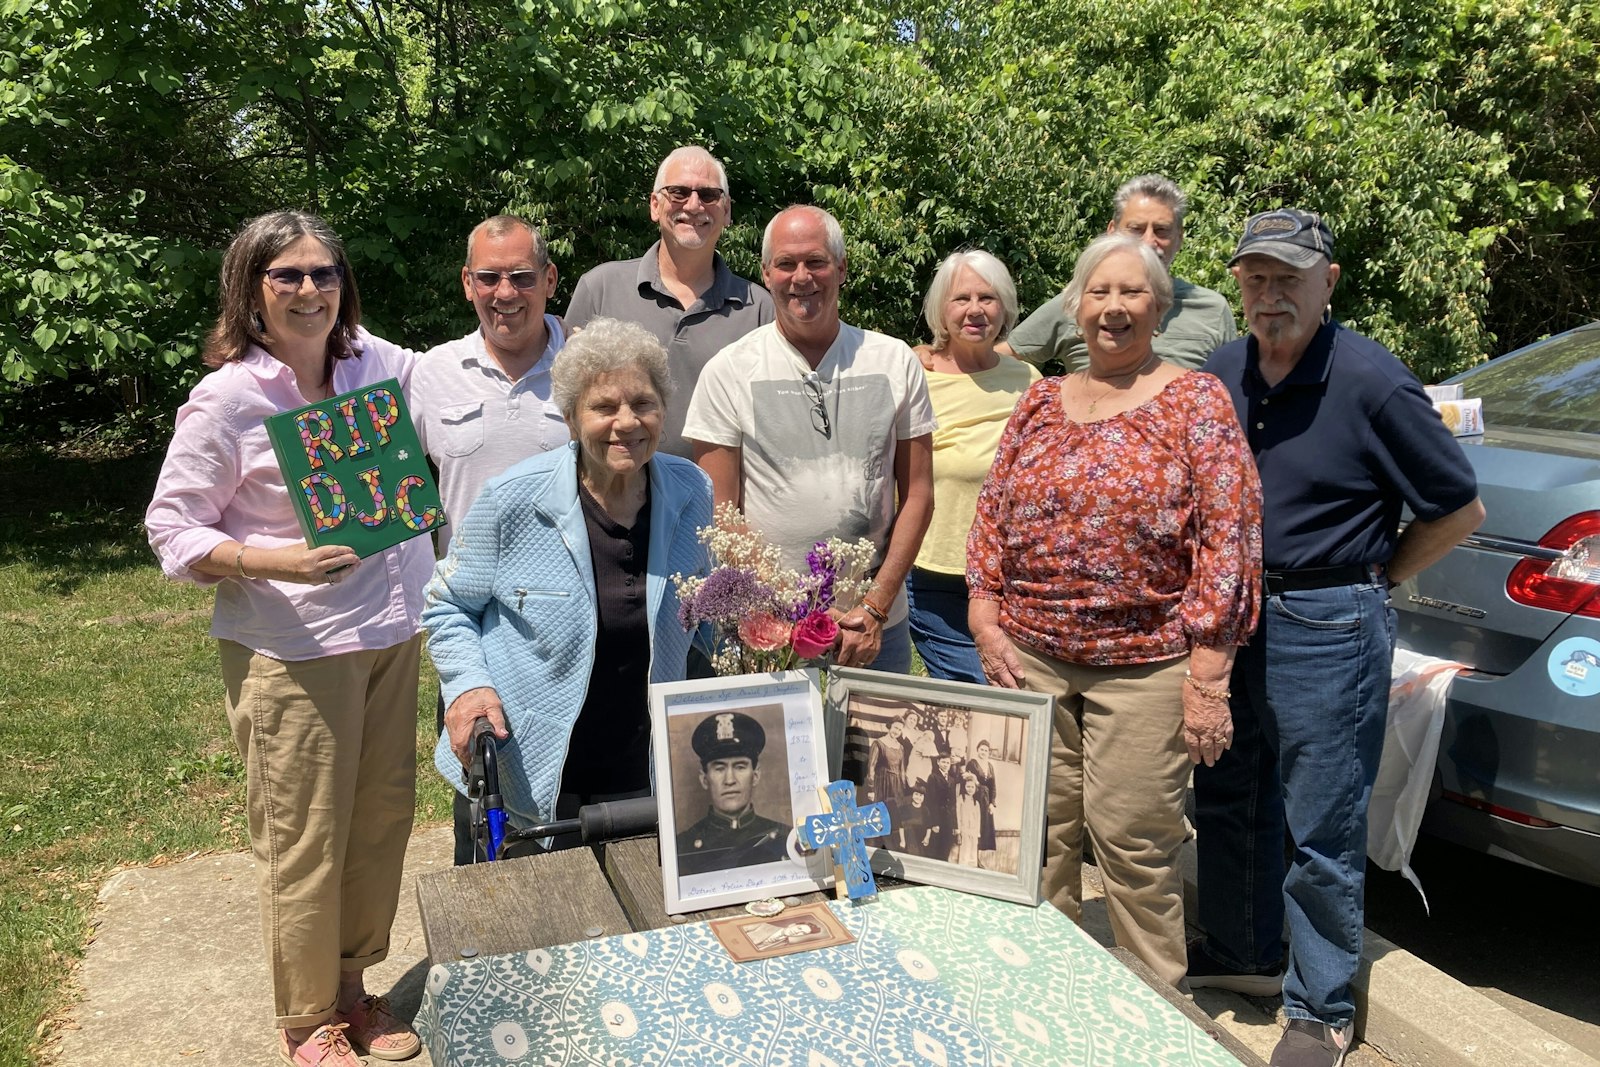 Family members gather June 9, which would have been Det. Sgt. Coughlin's 151st birthday, at the First Responder Memorial of Wayne County in Edward Hines Park in Plymouth Township. Pictured are (back row, left to right) Patricia Coughlin, Richard Petty, Patrick Coughlin, Sherry Wallen, Mike Helfrich, Tim Jimines, (front row, left to right) Betty Petty, Kit Clements and Marsha Jimines.